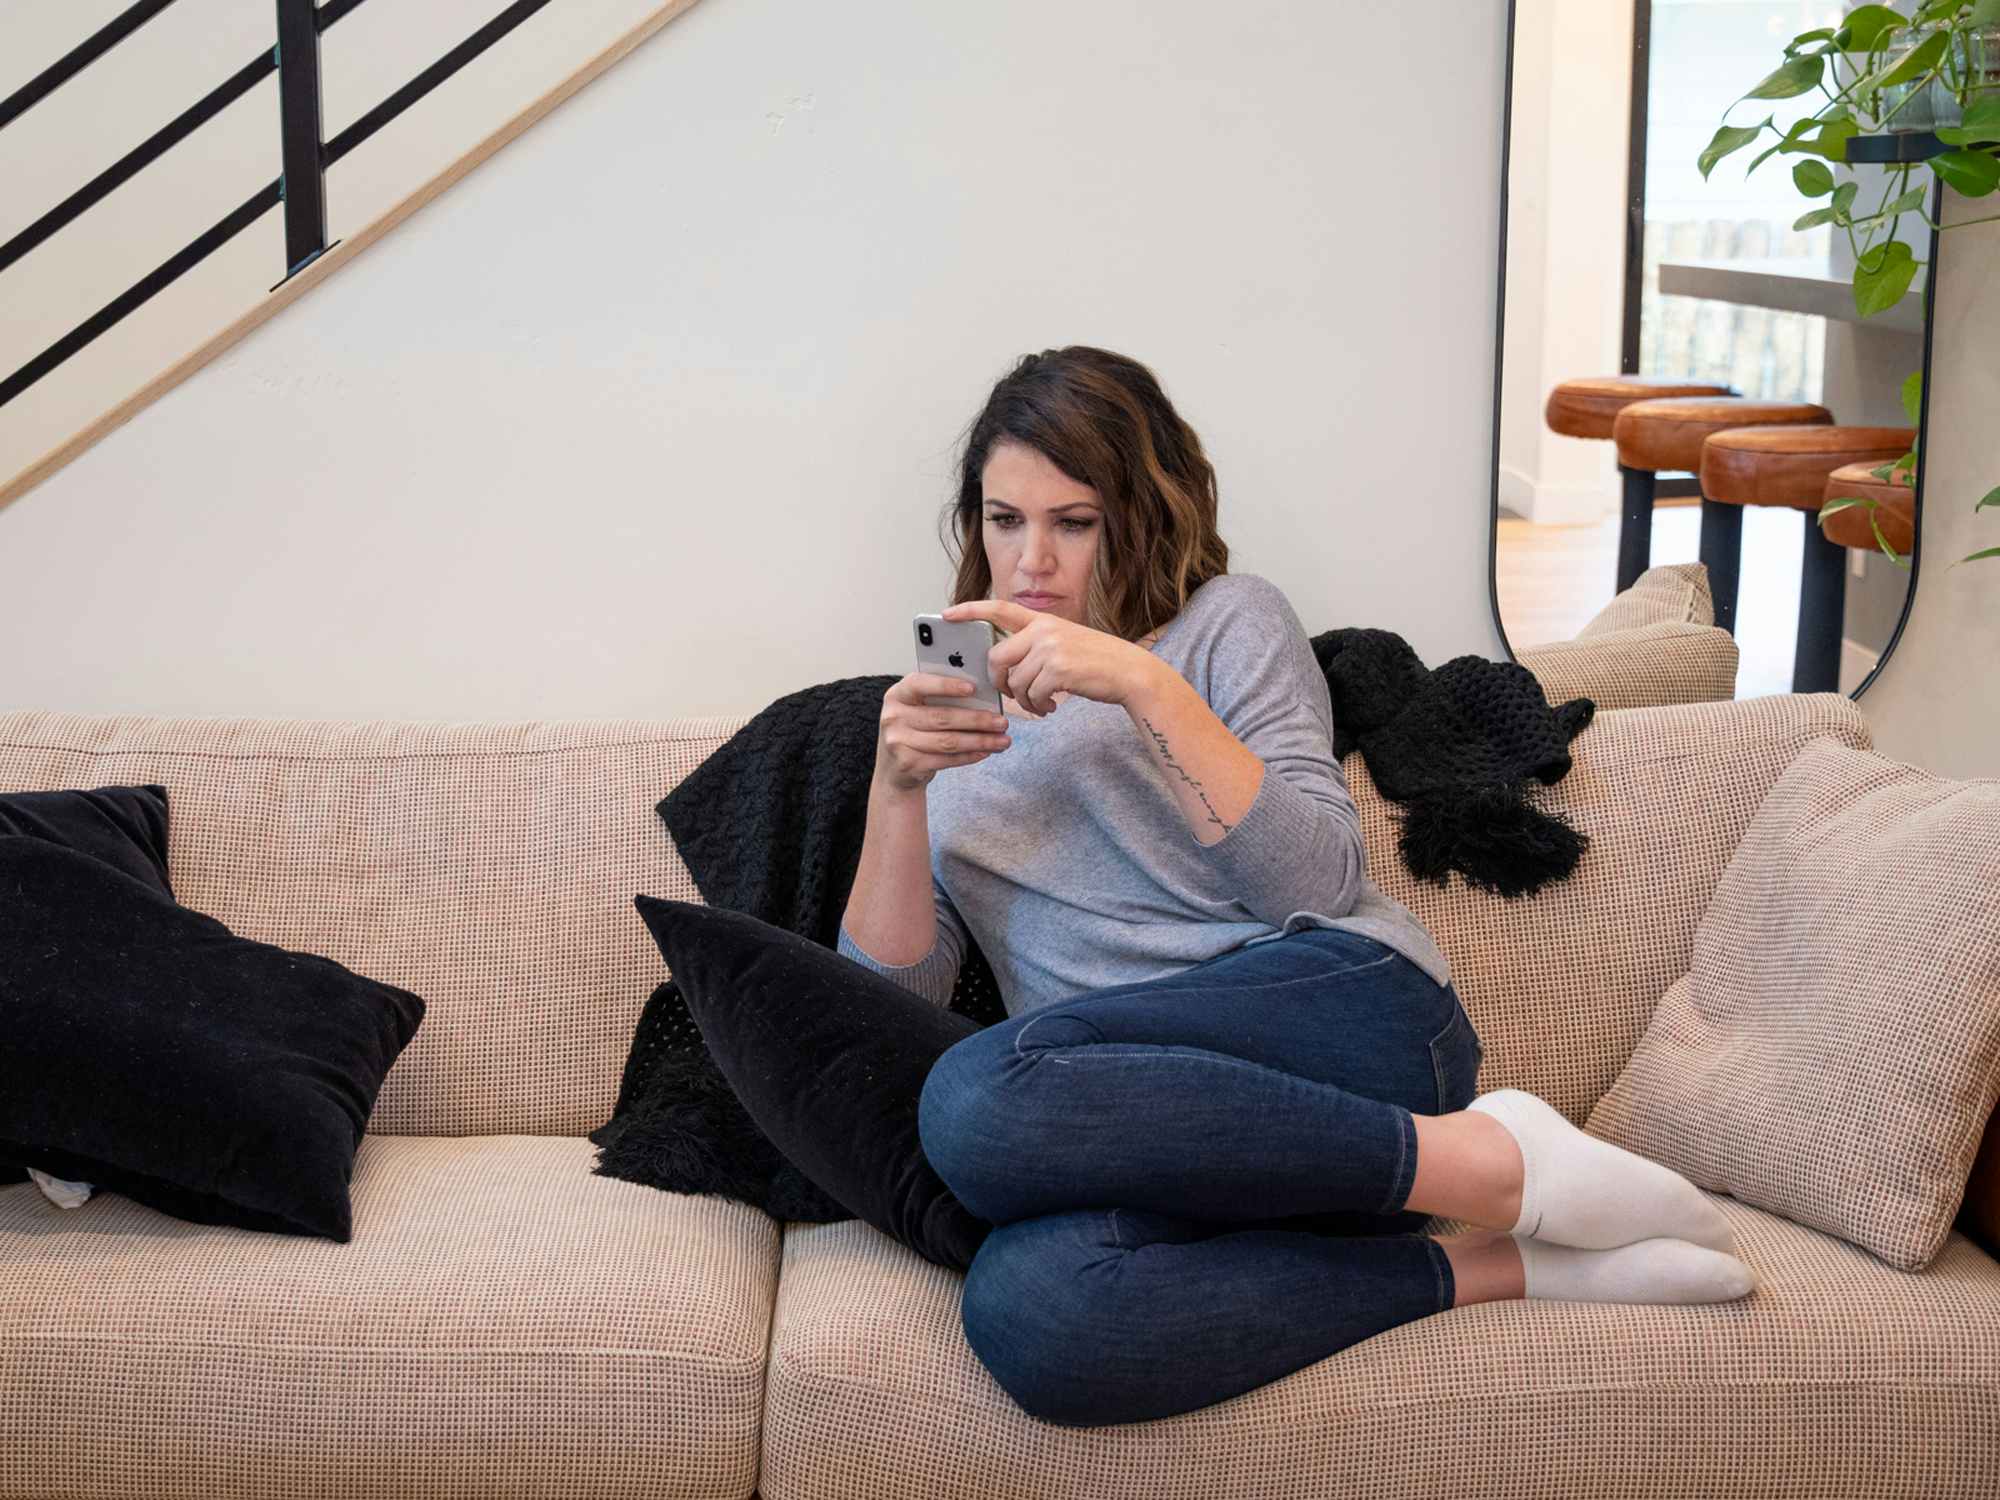 a person looking at a cell phone while sitting on a sofa